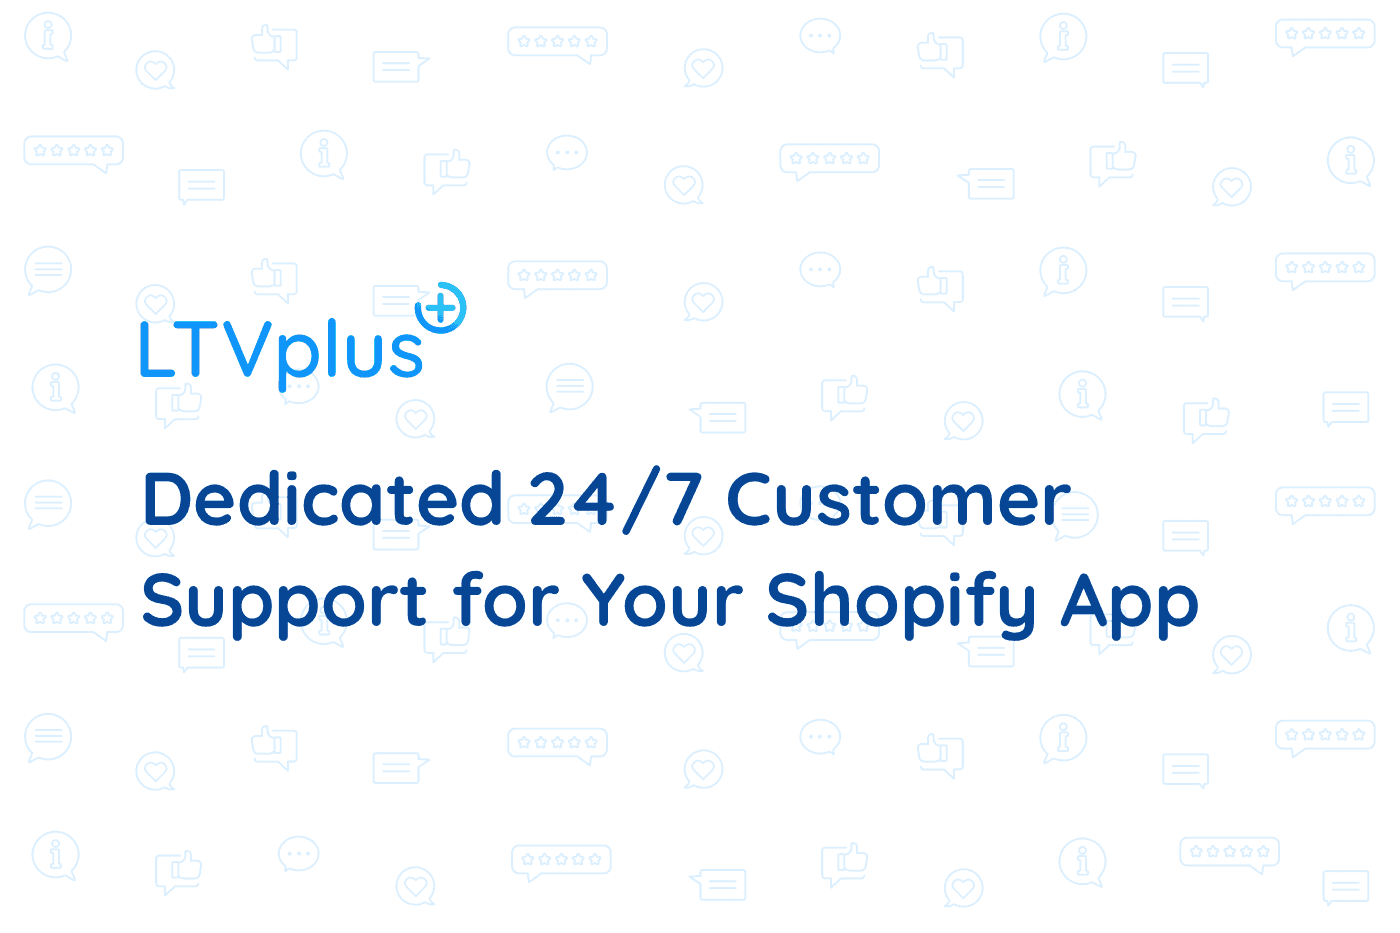 Dedicated 24/7 Customer Support for Your Shopify App